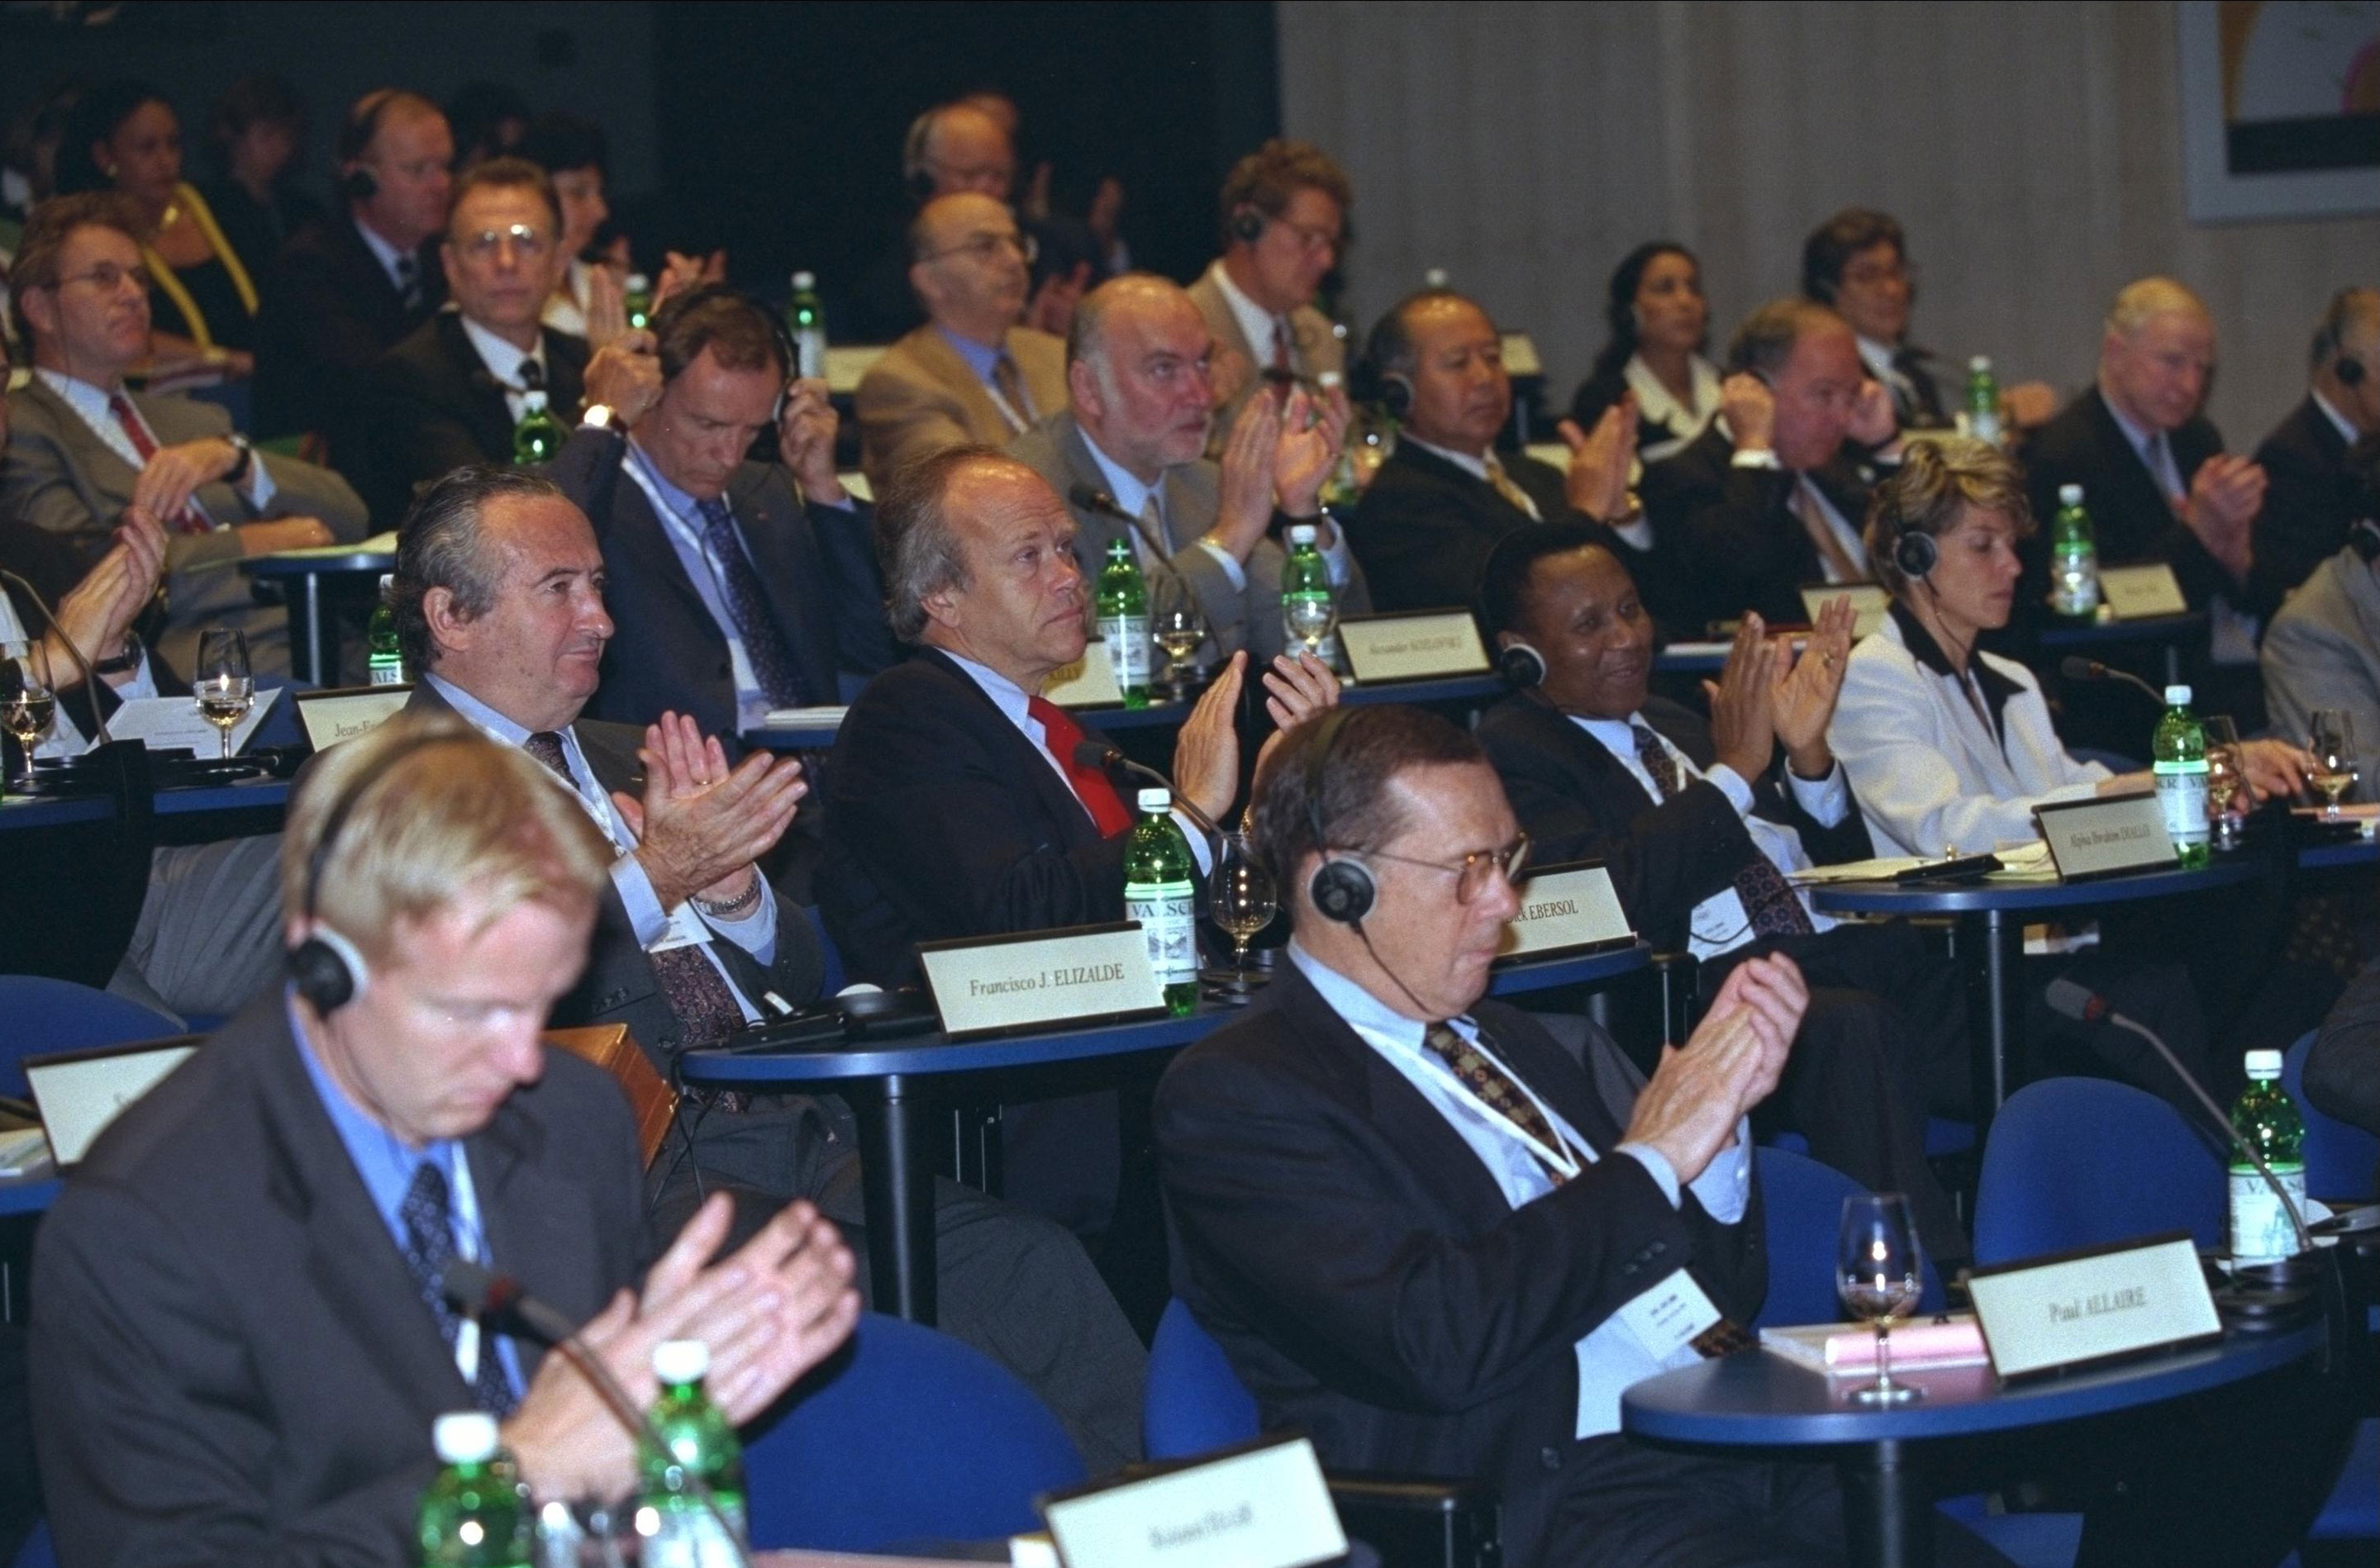 Meeting of the IOC 2000 Commission, Olympic Museum, Lausanne